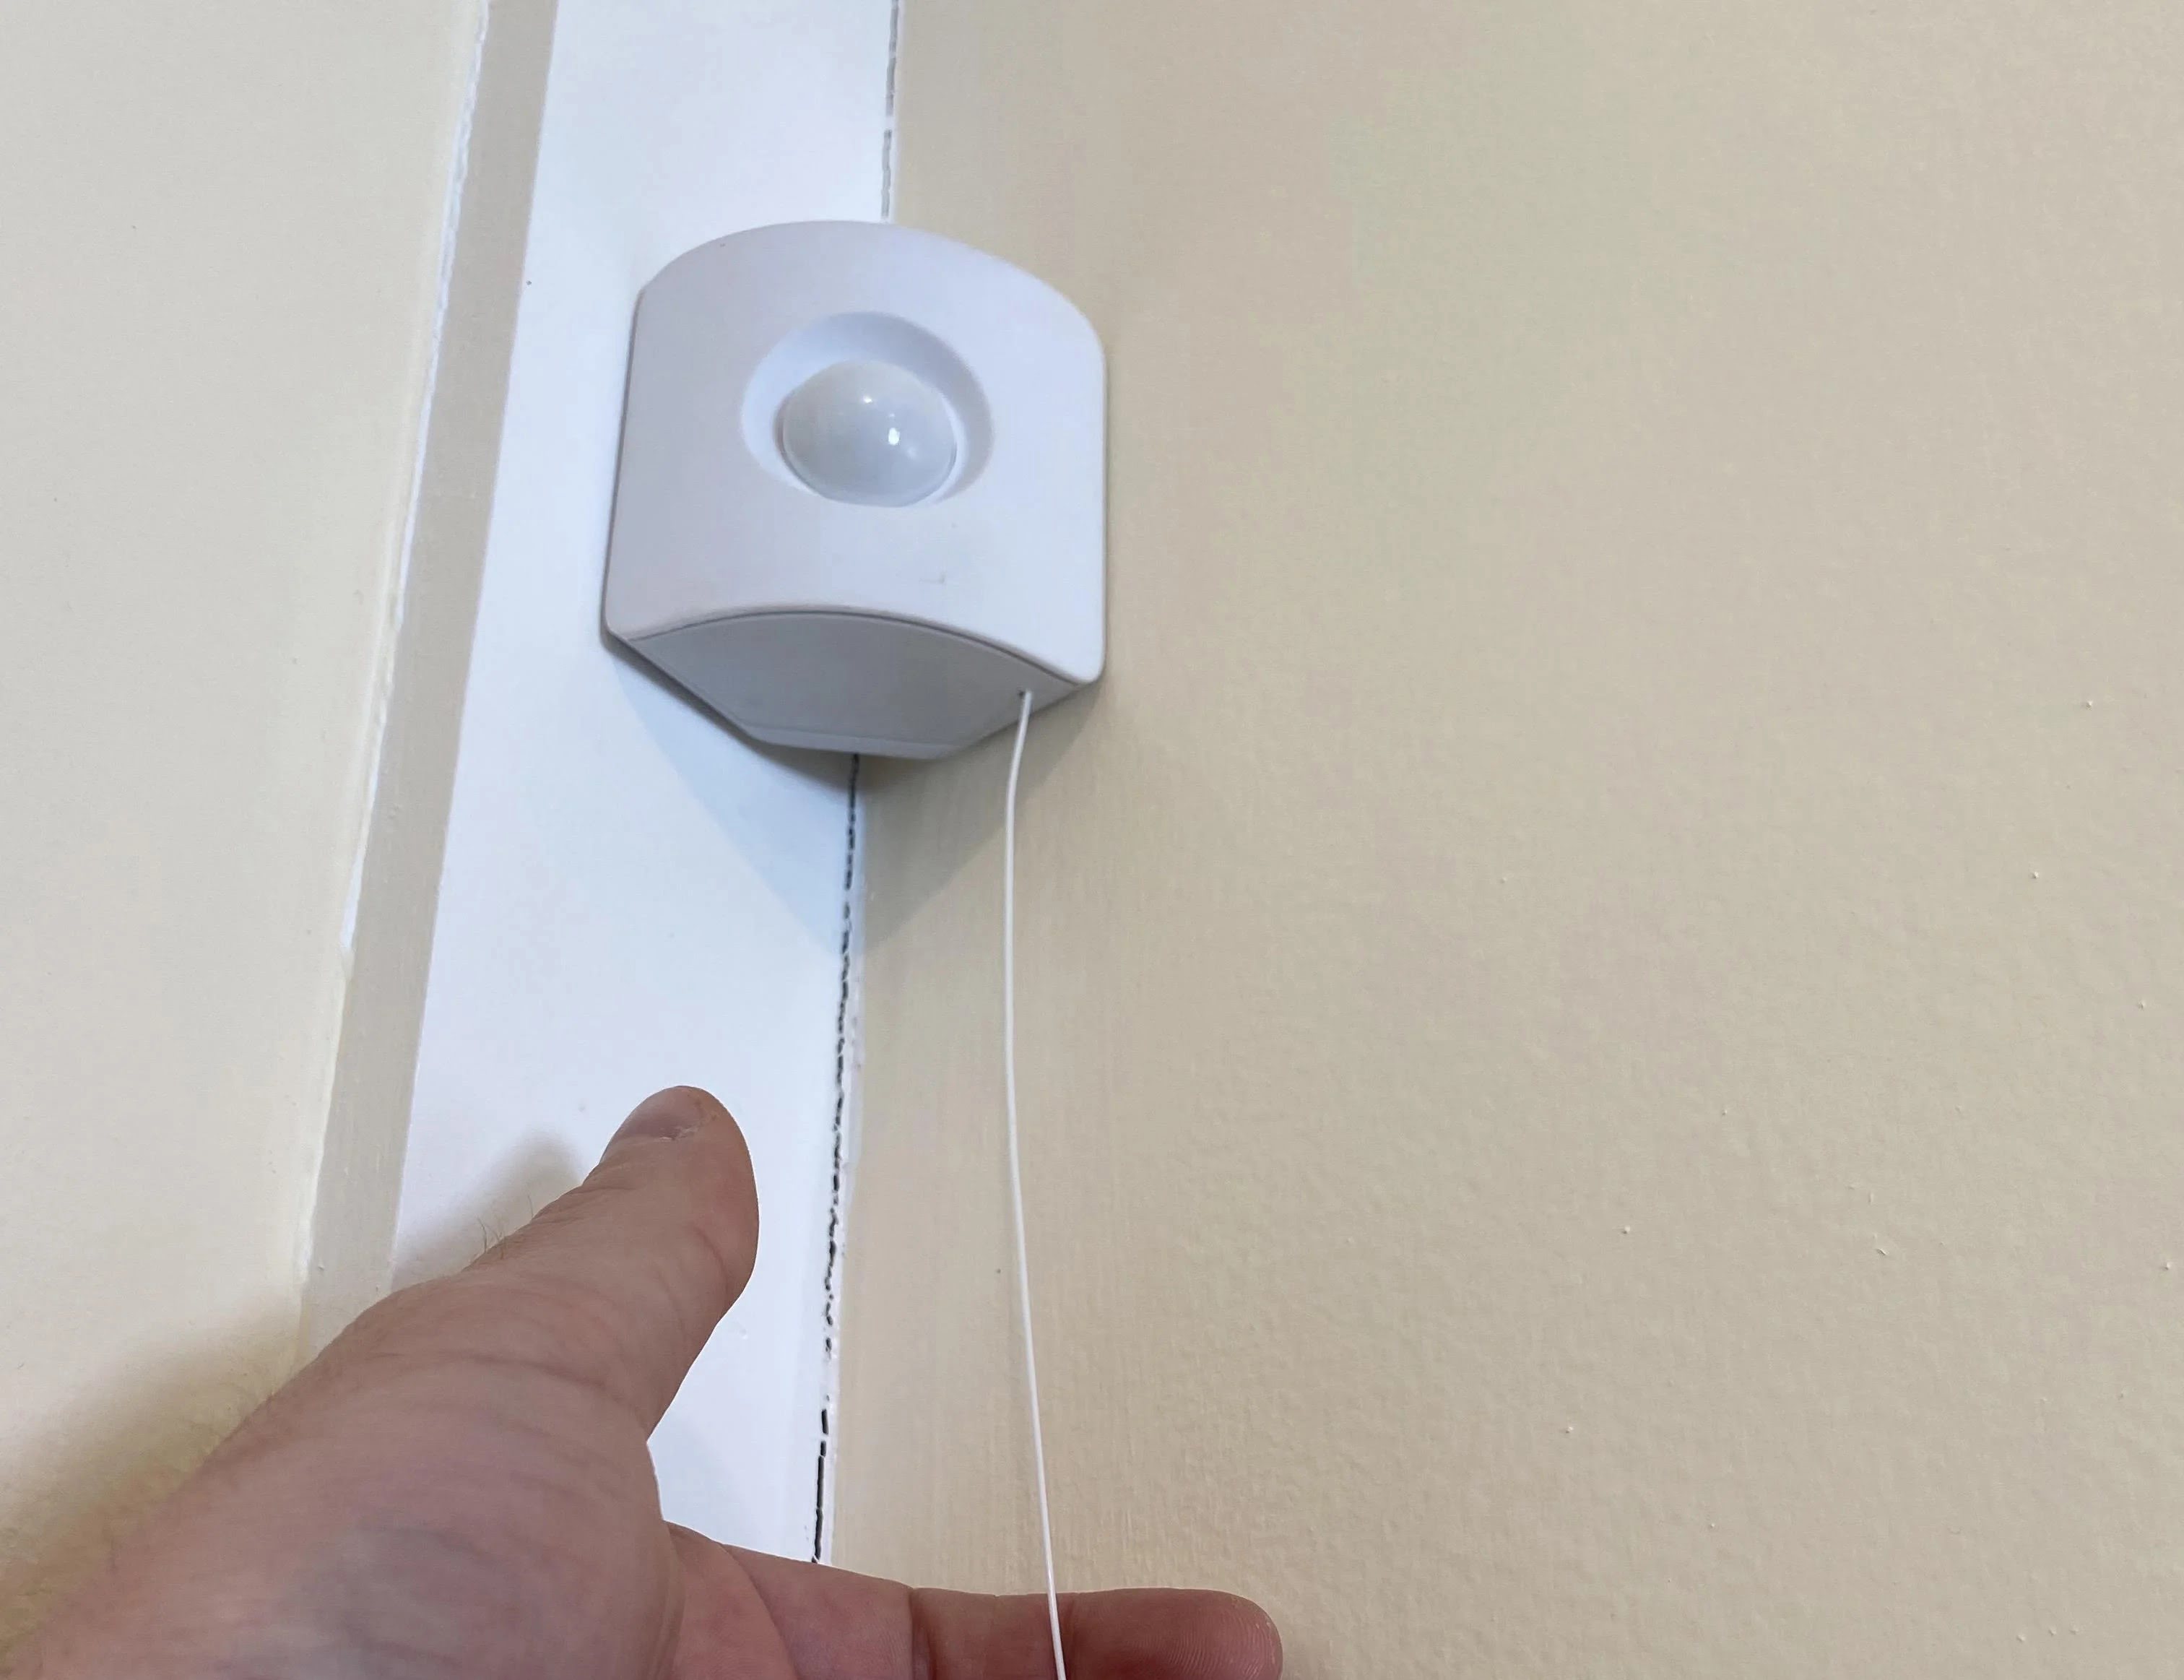 How High To Install Simplisafe Motion Detector